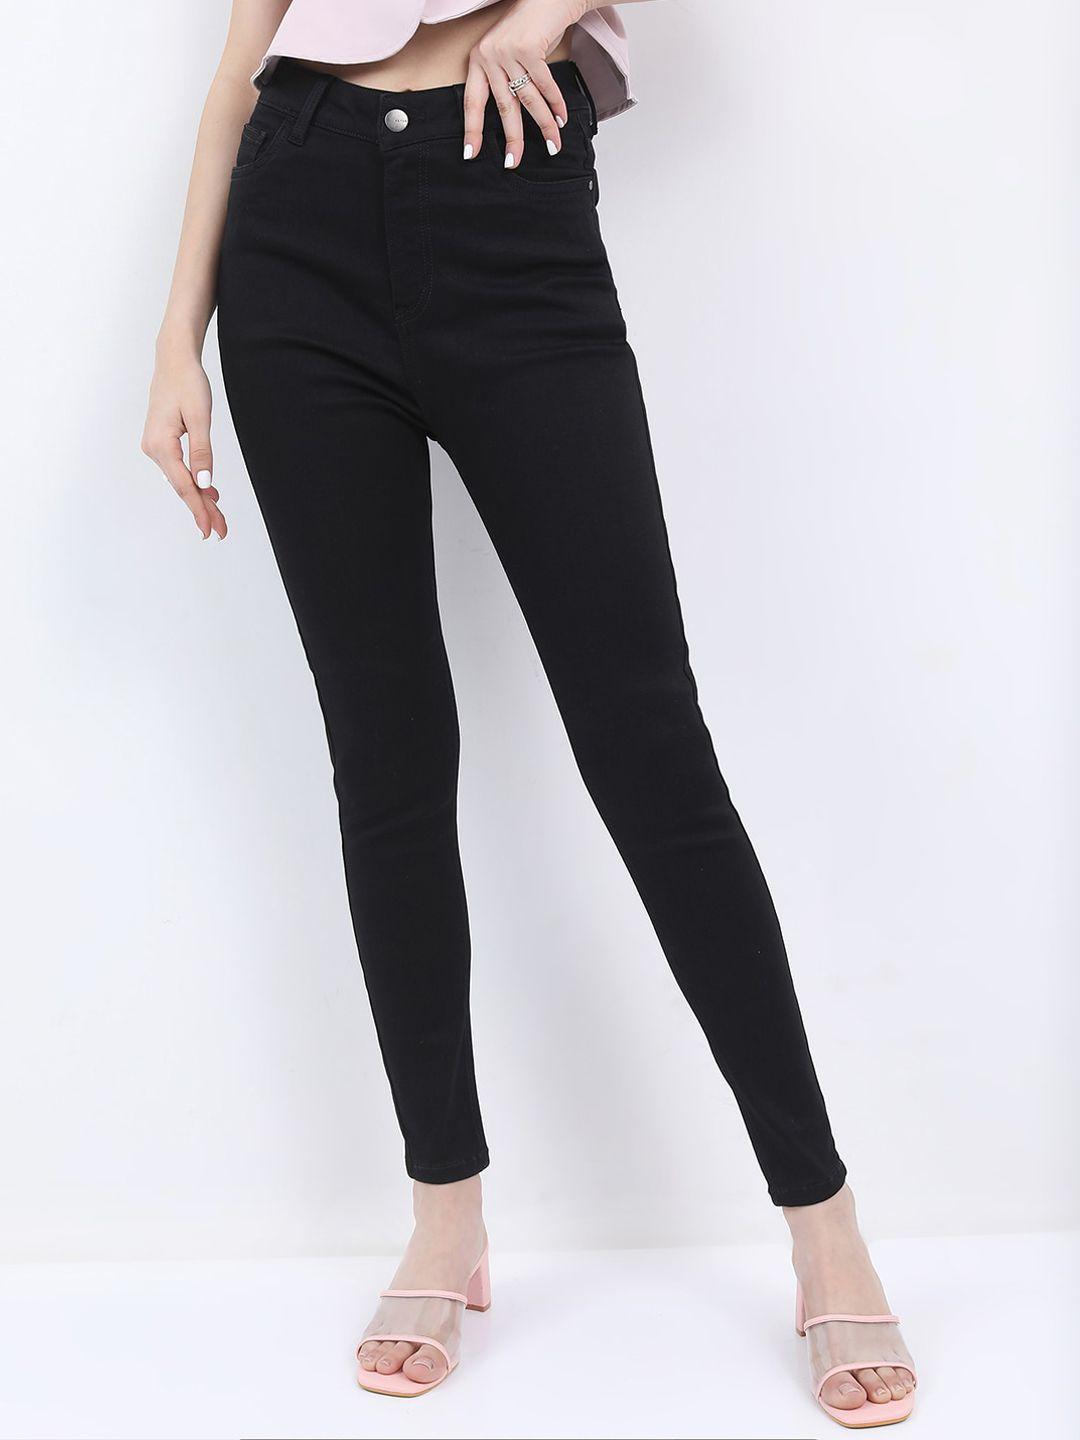 ketch-women-skinny-fit-high-rise-jeans